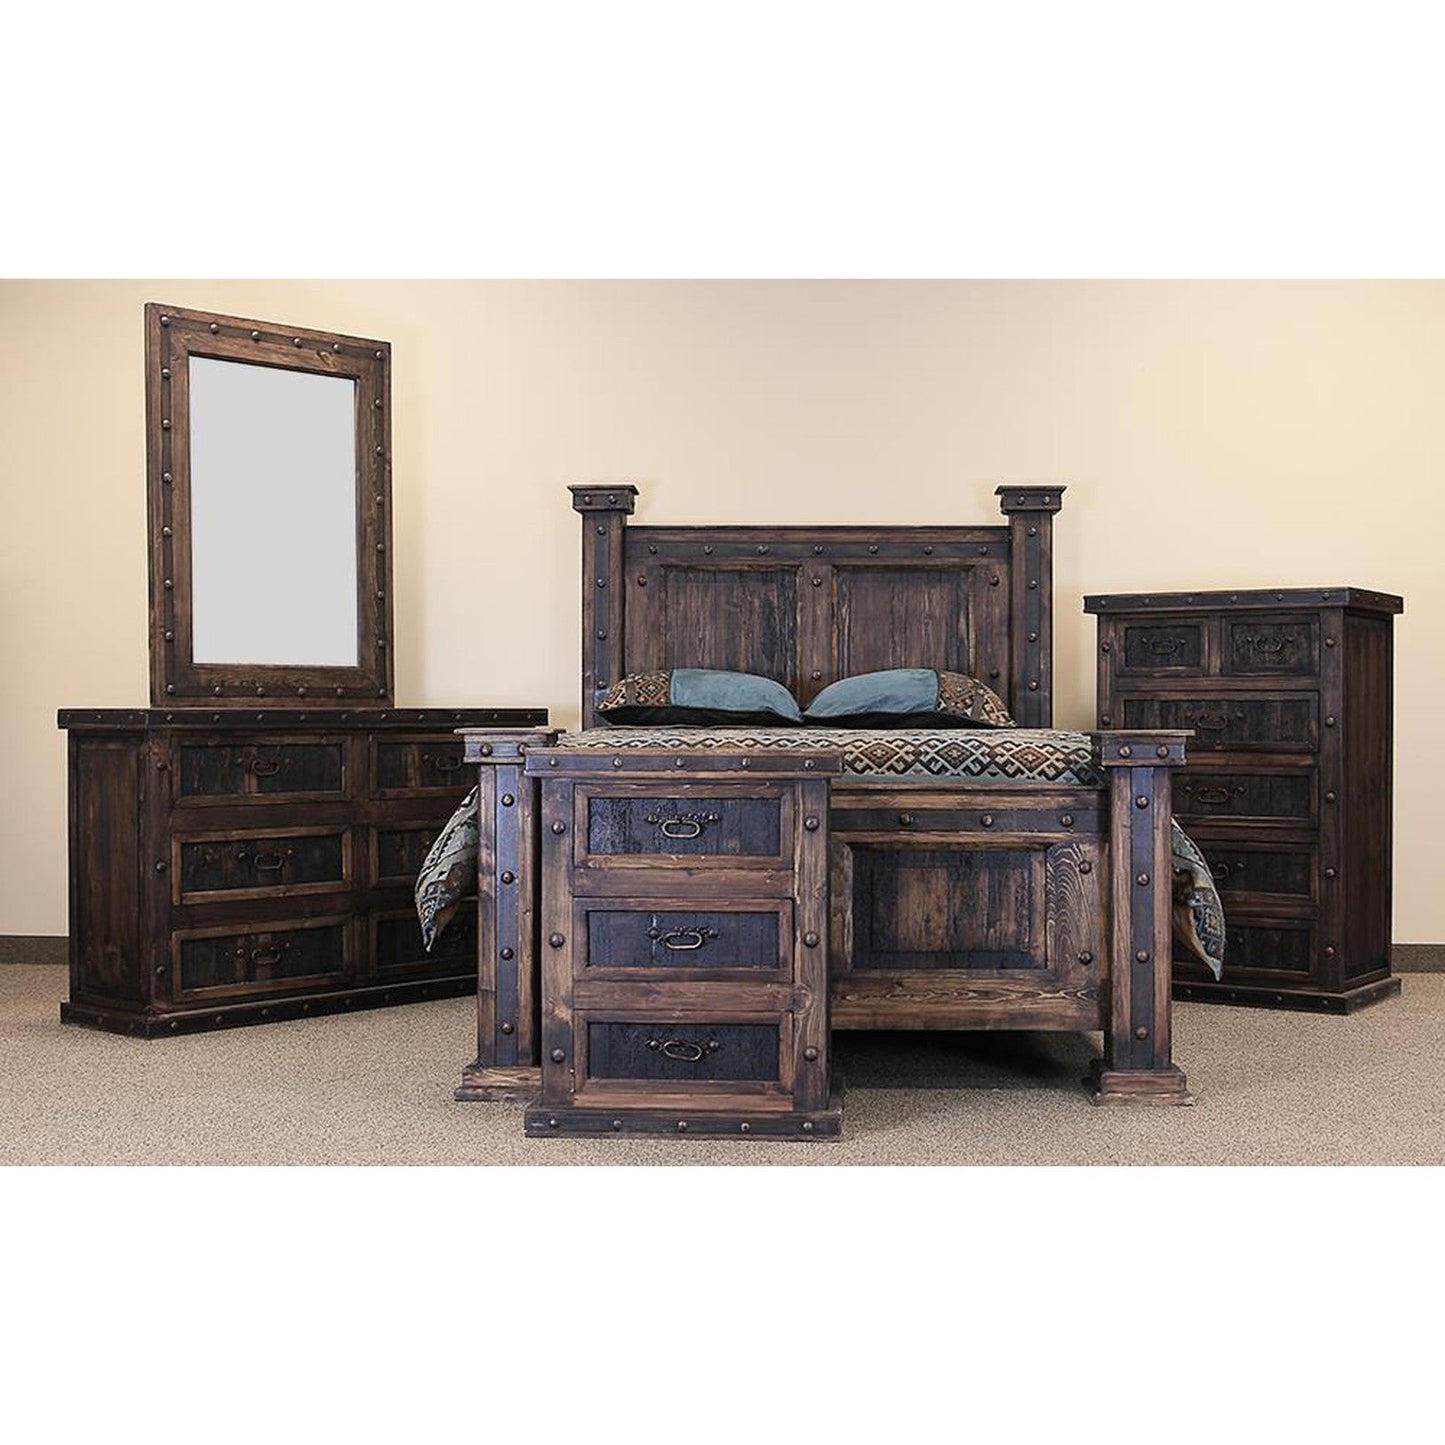 The Finca Bed features a rustic wood frame with metal banding accents for a timeless look. Crafted from durable, high-quality wood, this bed is designed for long-term use and provides lasting comfort and support. Incorporate classic style into any bedroom with the Finca Bed.